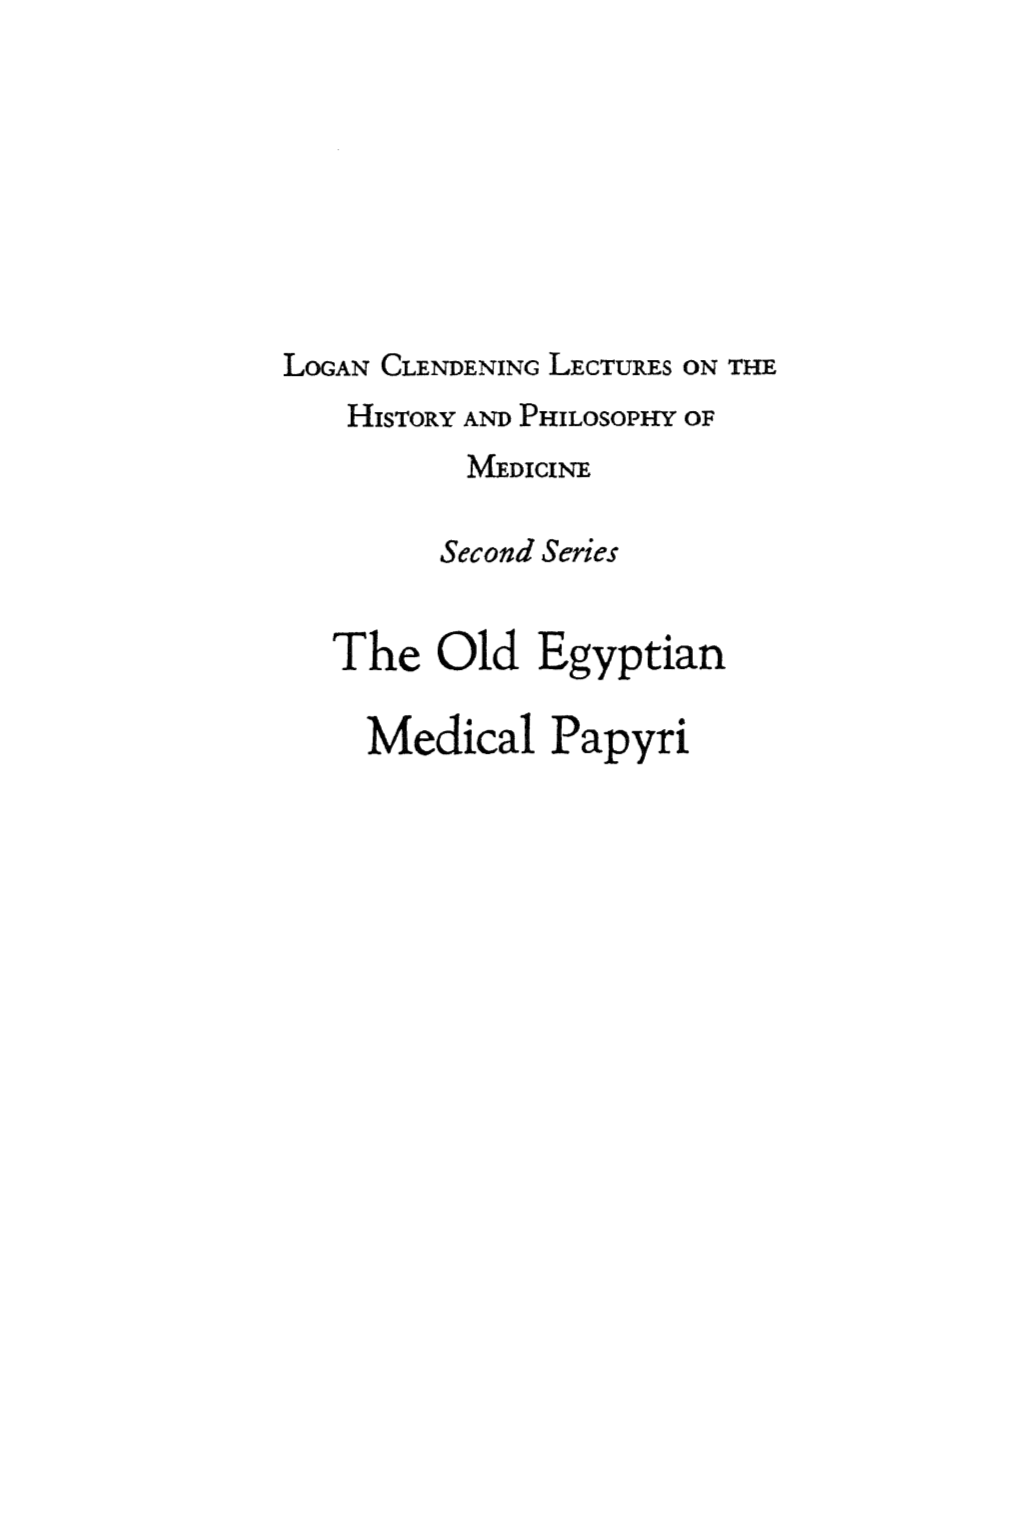 The Old Egyptian Medical Papyri LOGAN CLENDENING LECTURES on the HISTORY AND